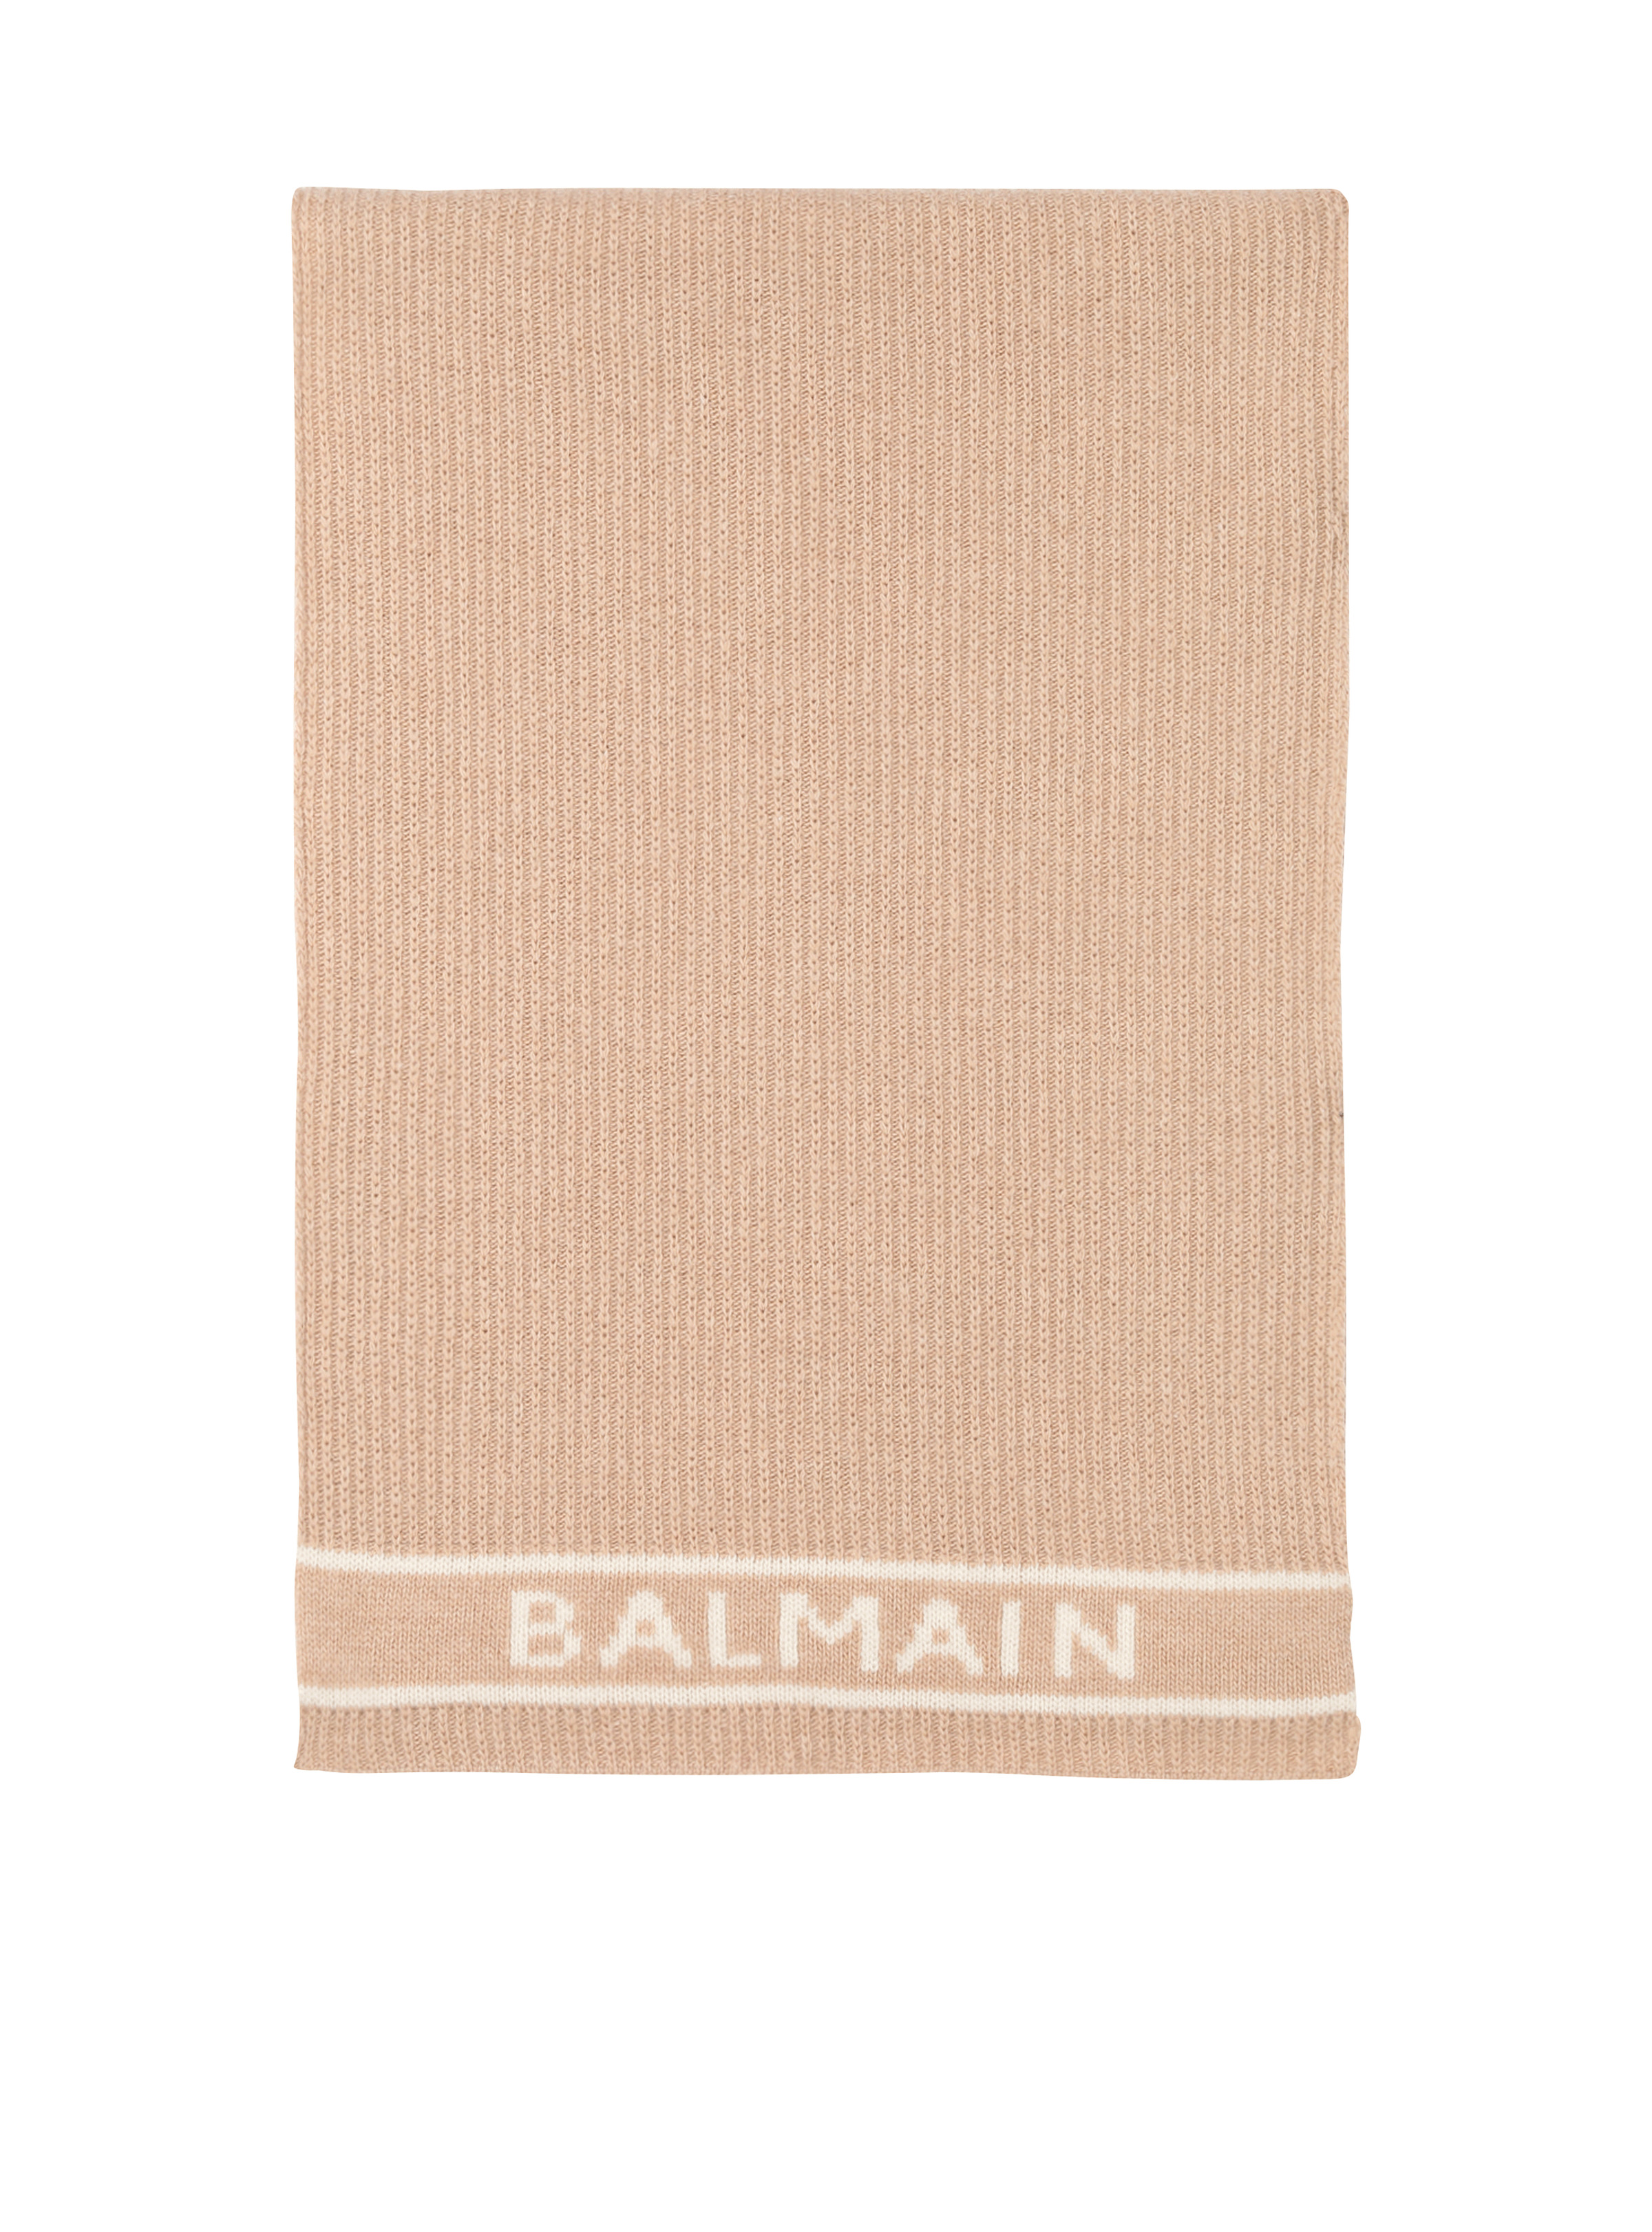 Wool and cashmere scarf with embroidered Balmain logo - 1